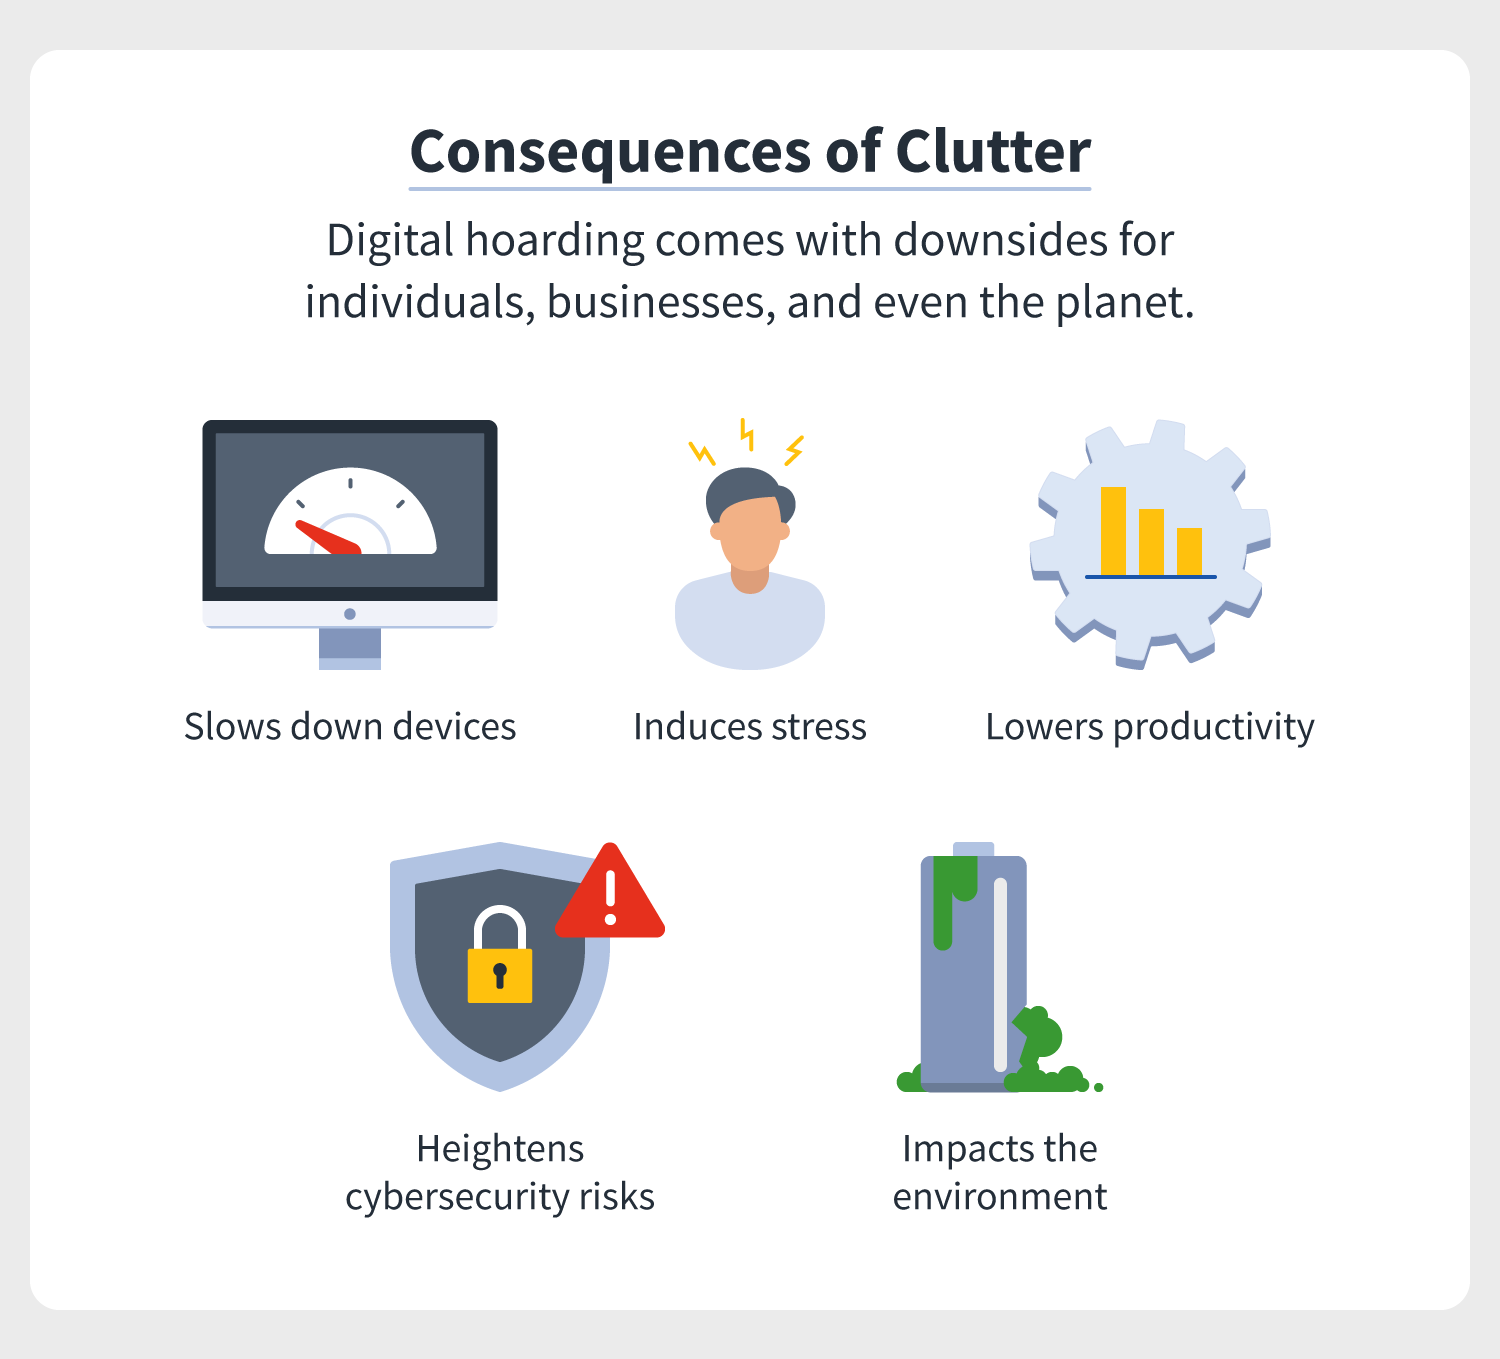 an explanation of how digital hoarding slows down devices, induces stress, lowers productivity, heightens cybersecurity risks, and impacts the environment